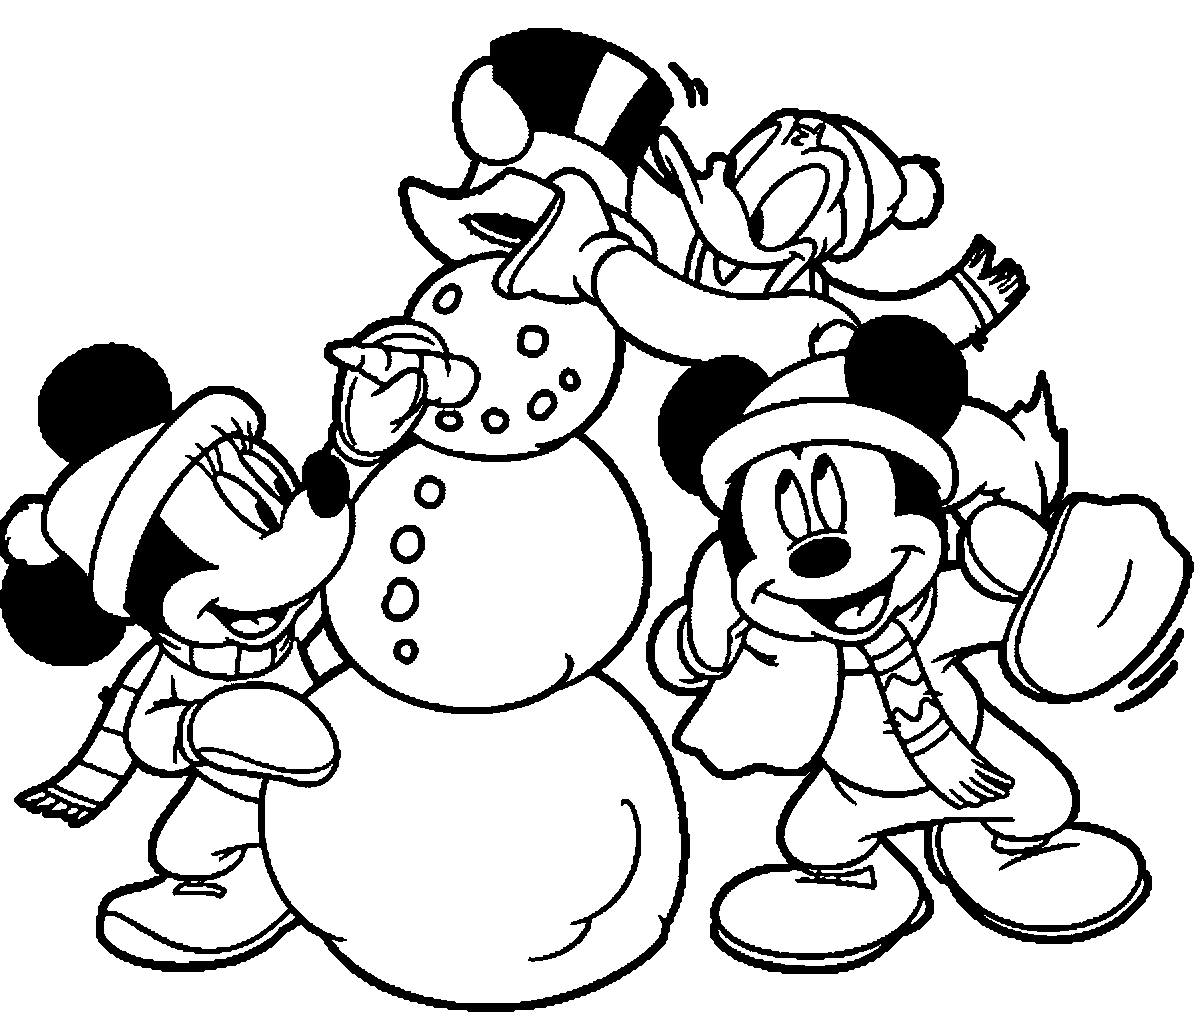 37. Snowman New Year Coloring Page